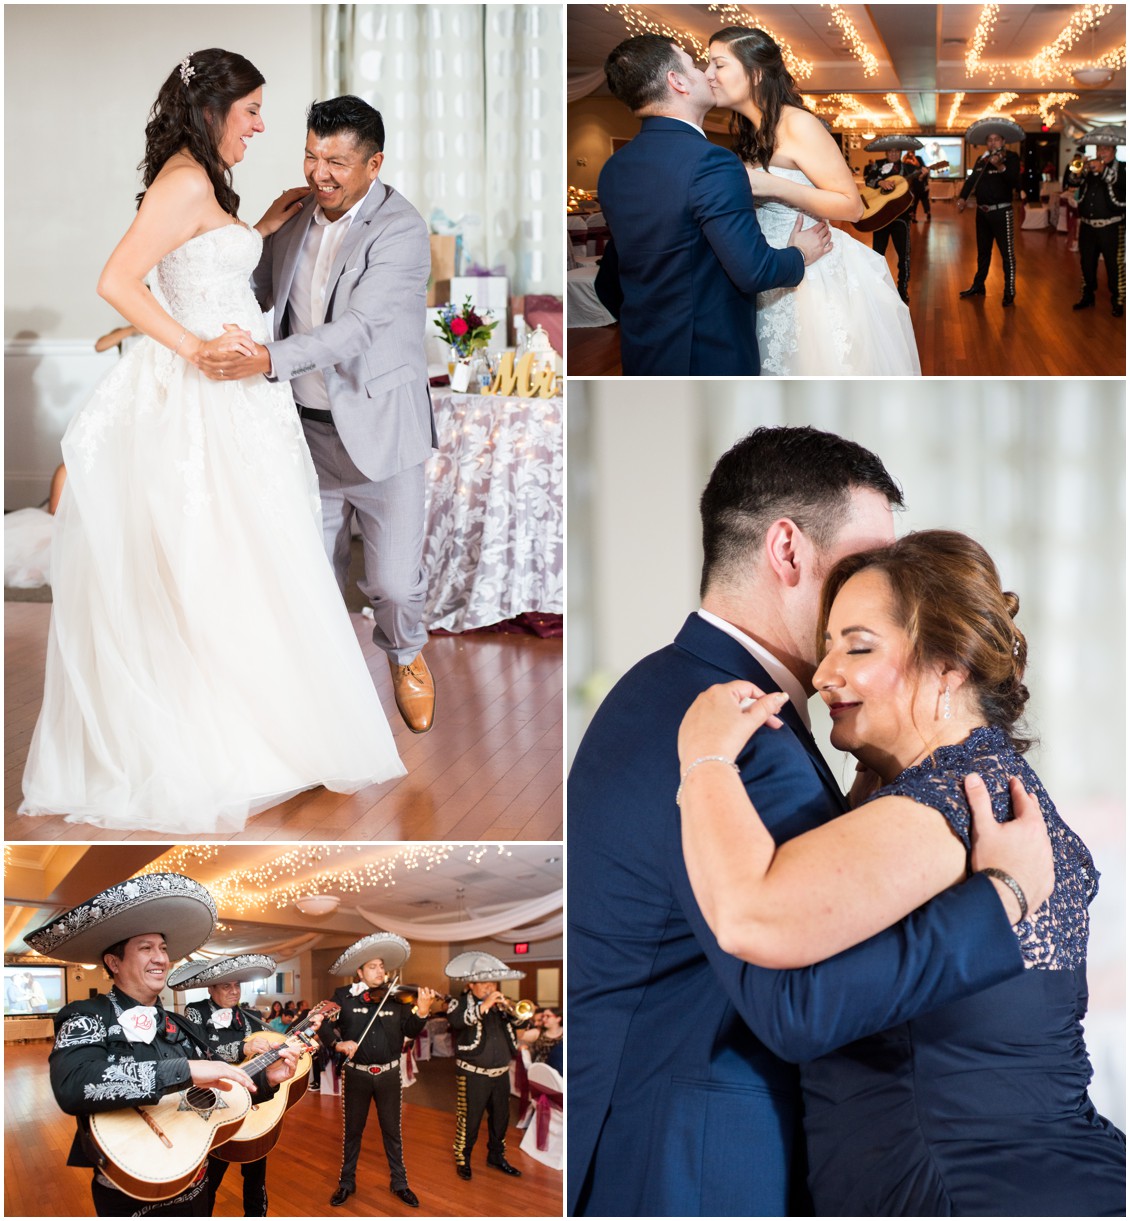 Eastern Shore wedding father/daughter and Mother/son dances Melissa Grimes-Guy Photography